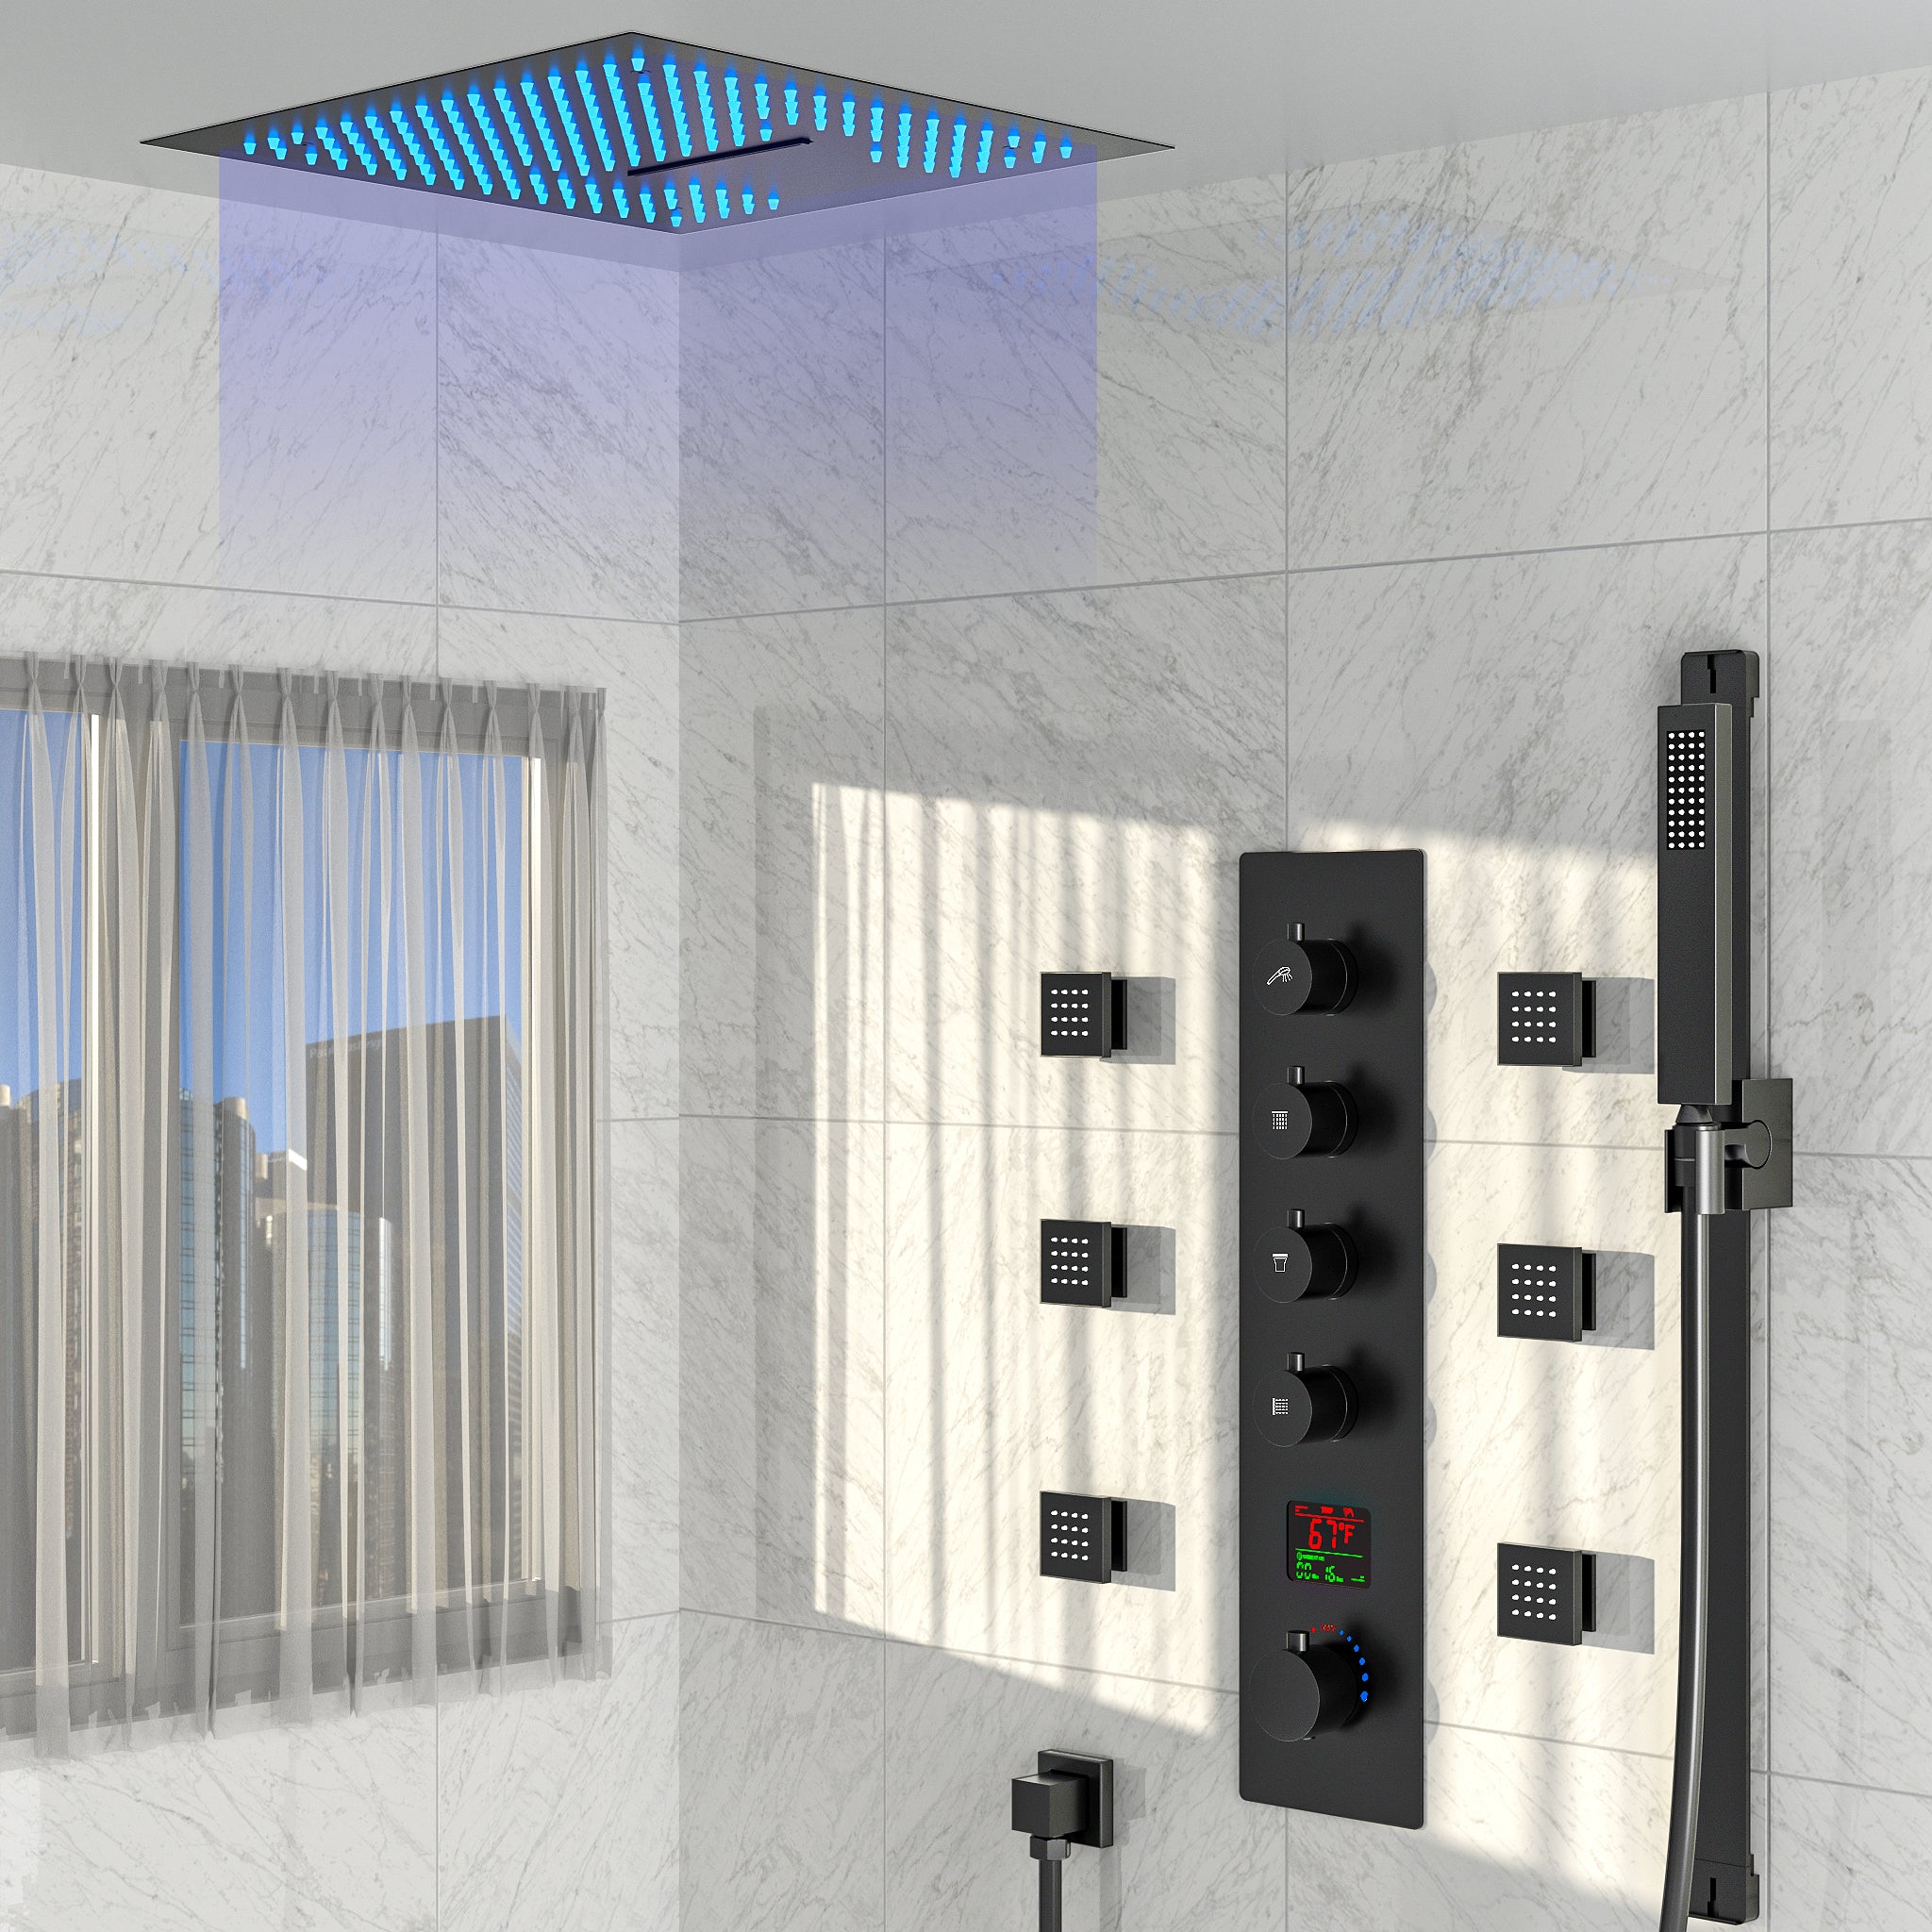 SFS-1027-BK16 EVERSTEIN LED Thermostatic Shower Head System with Rough-in Valve in Matte Black